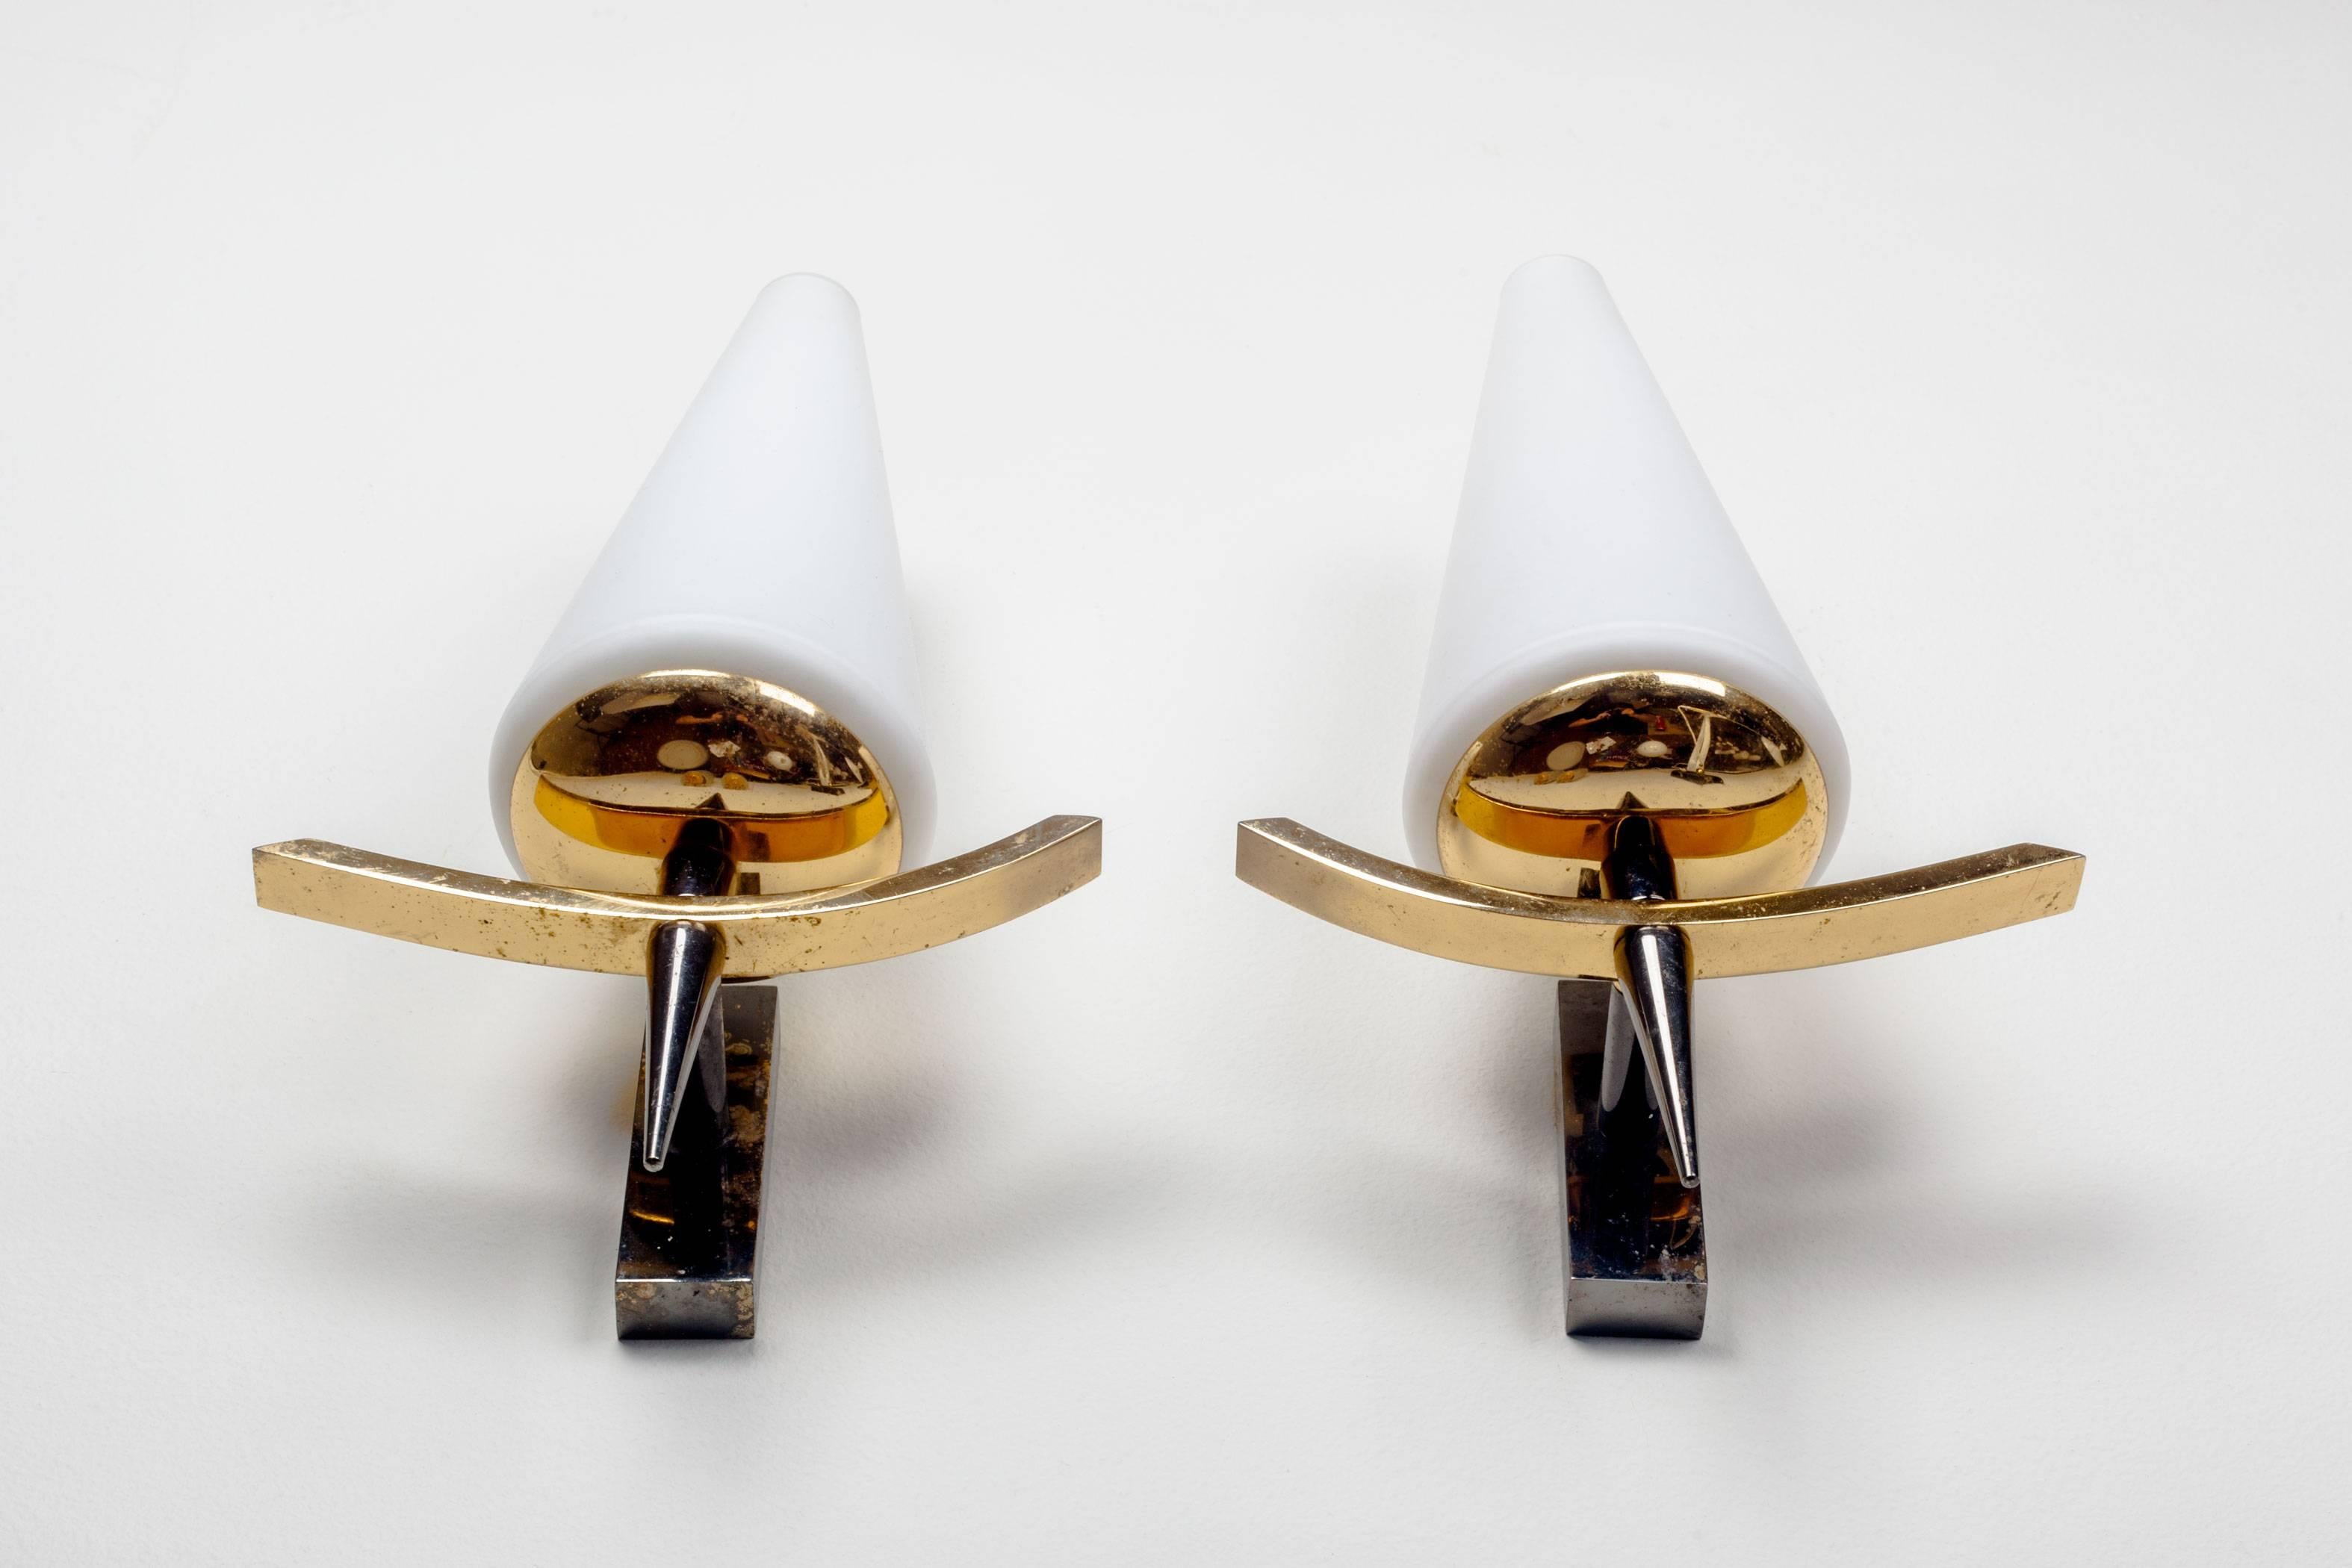 Mid-20th Century Vintage French Sconces by Arlus with Conic White Glass Shades and Brass, 1950s